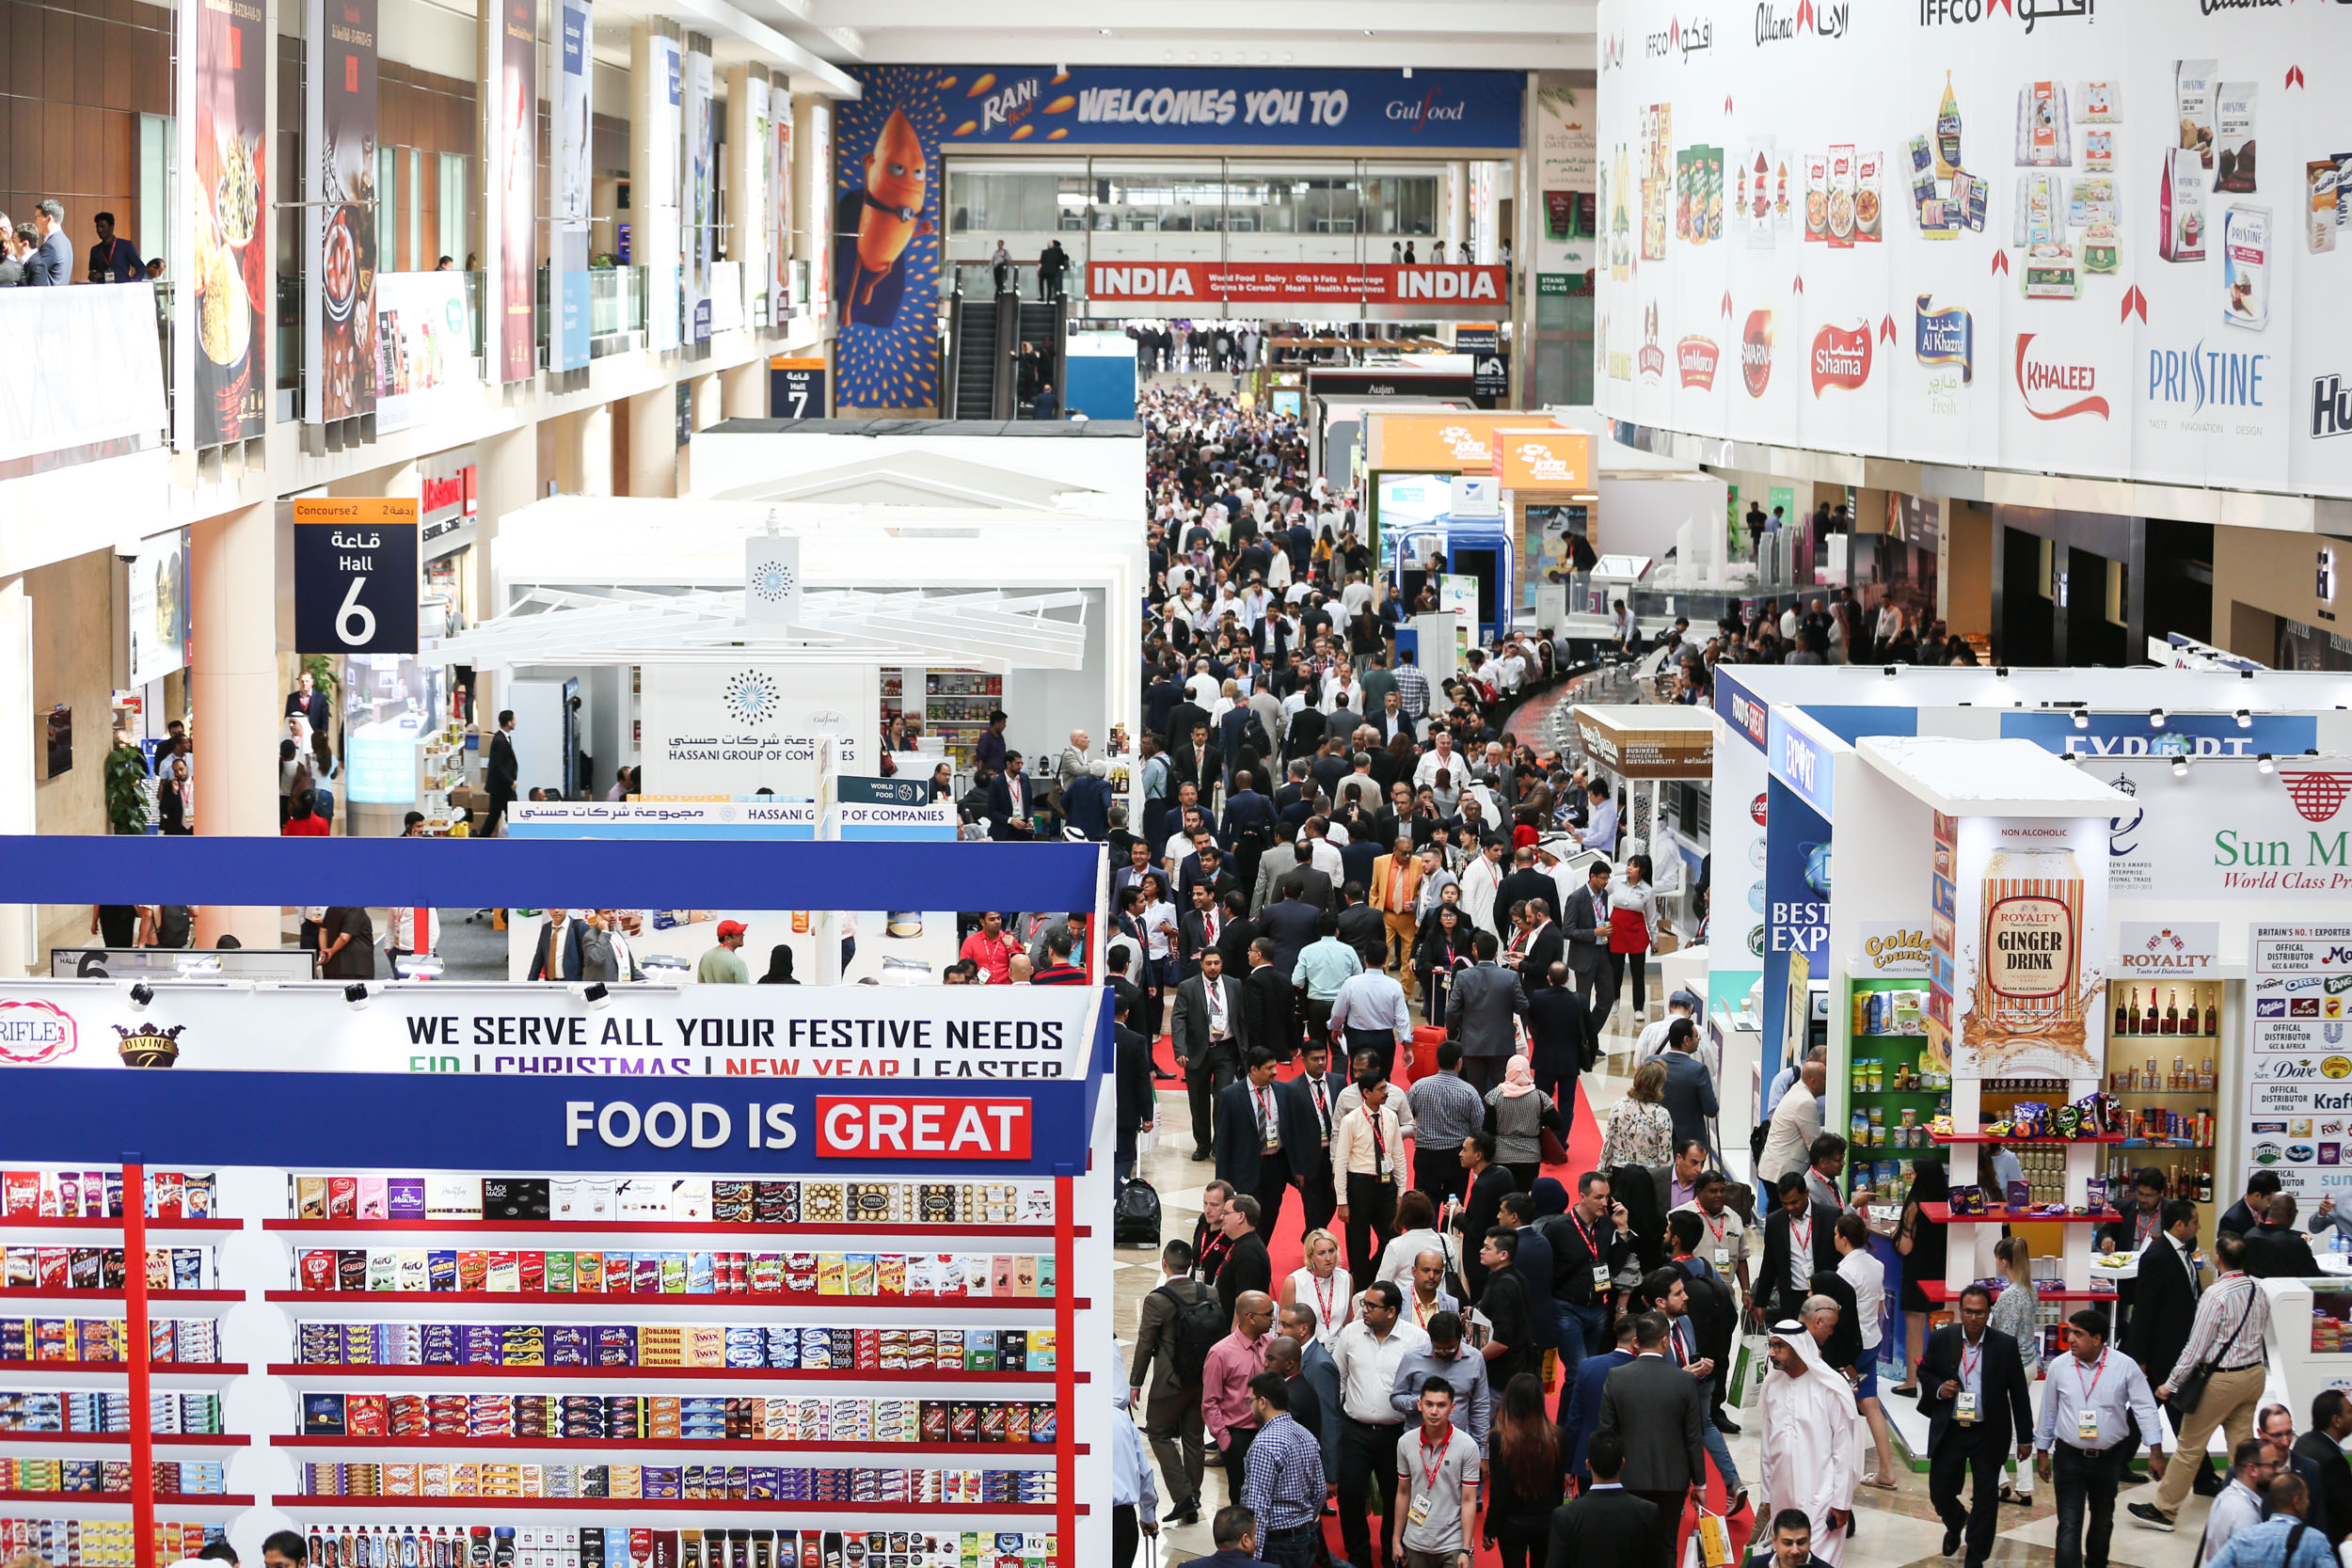 Image 03 - Gulfood - the world’s largest annual food and beverage trade exhibition set to return in 2019